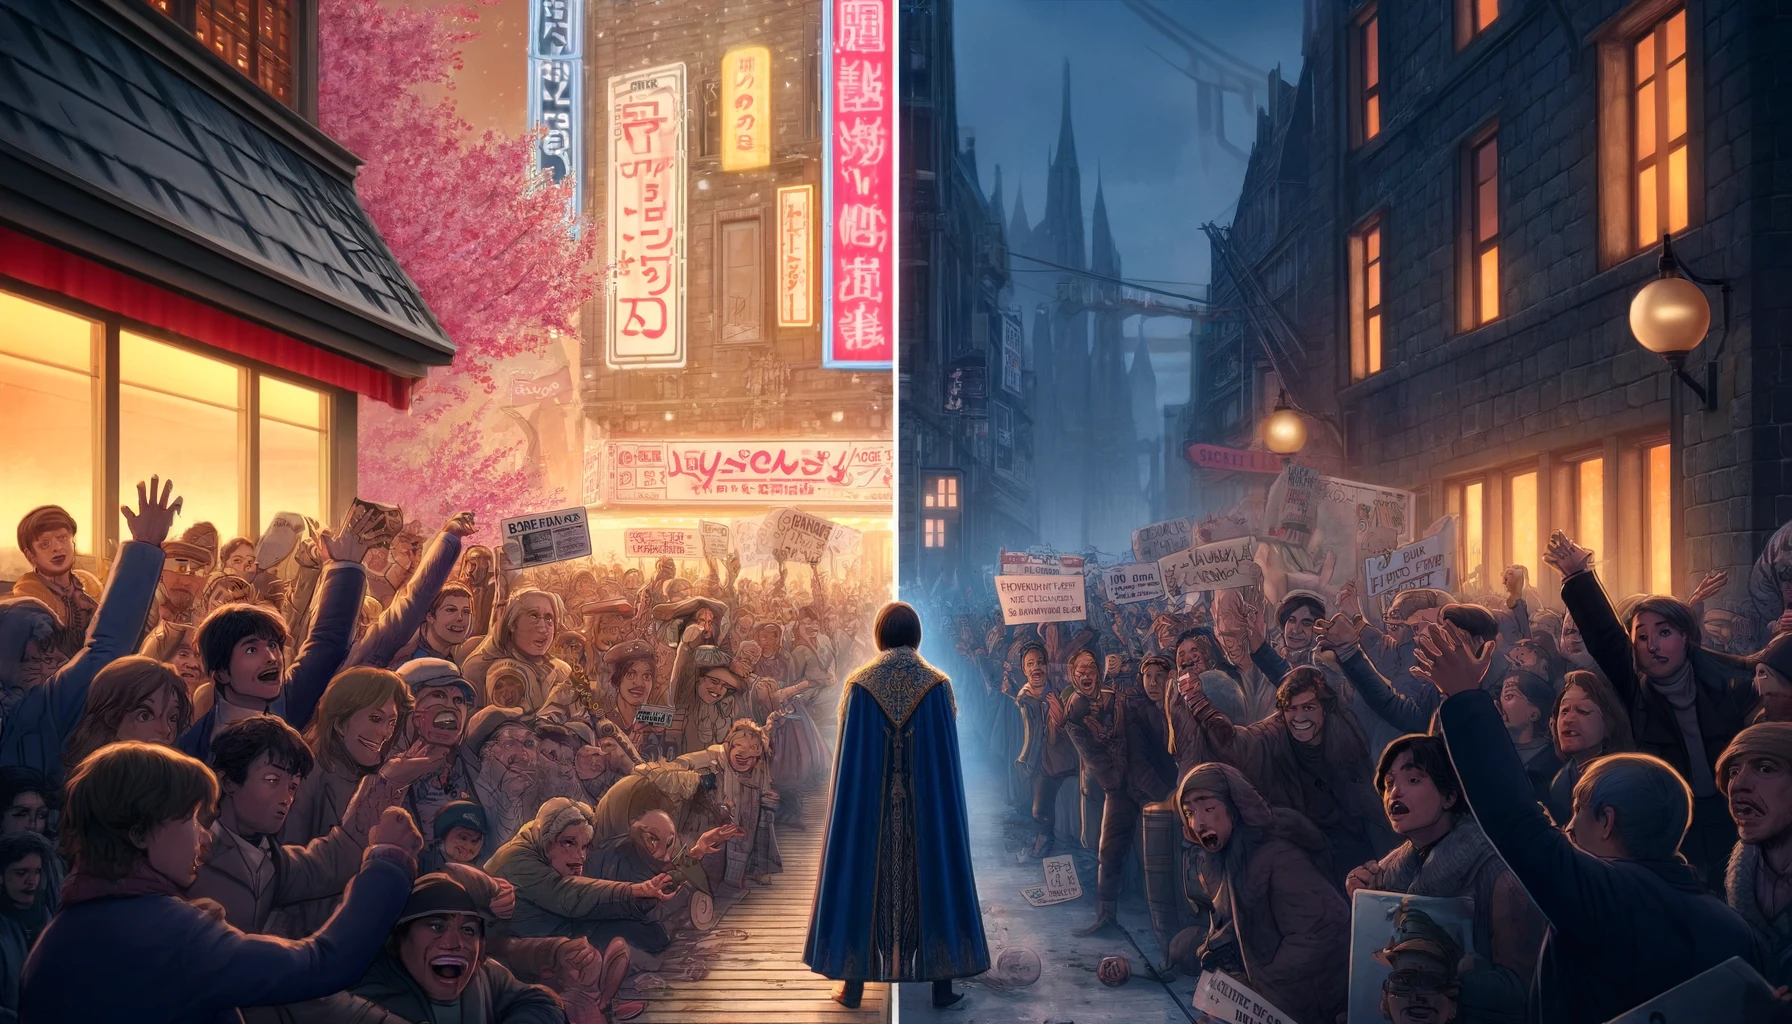 A scene illustrating the contrasting receptions of a fantasy film villain from a story about a young wizard in Japan and overseas. The image is split in half: on the left, the Japanese side shows the villain being celebrated by a crowd, with fans wearing costumes and holding signs in a festive urban setting. On the right, the overseas side shows the villain being scorned by a crowd in a Western city, with protesters holding placards and booing. The settings are distinctly cultural: Japan with neon signs and sakura blossoms, and the West with historic stone buildings and autumn leaves.